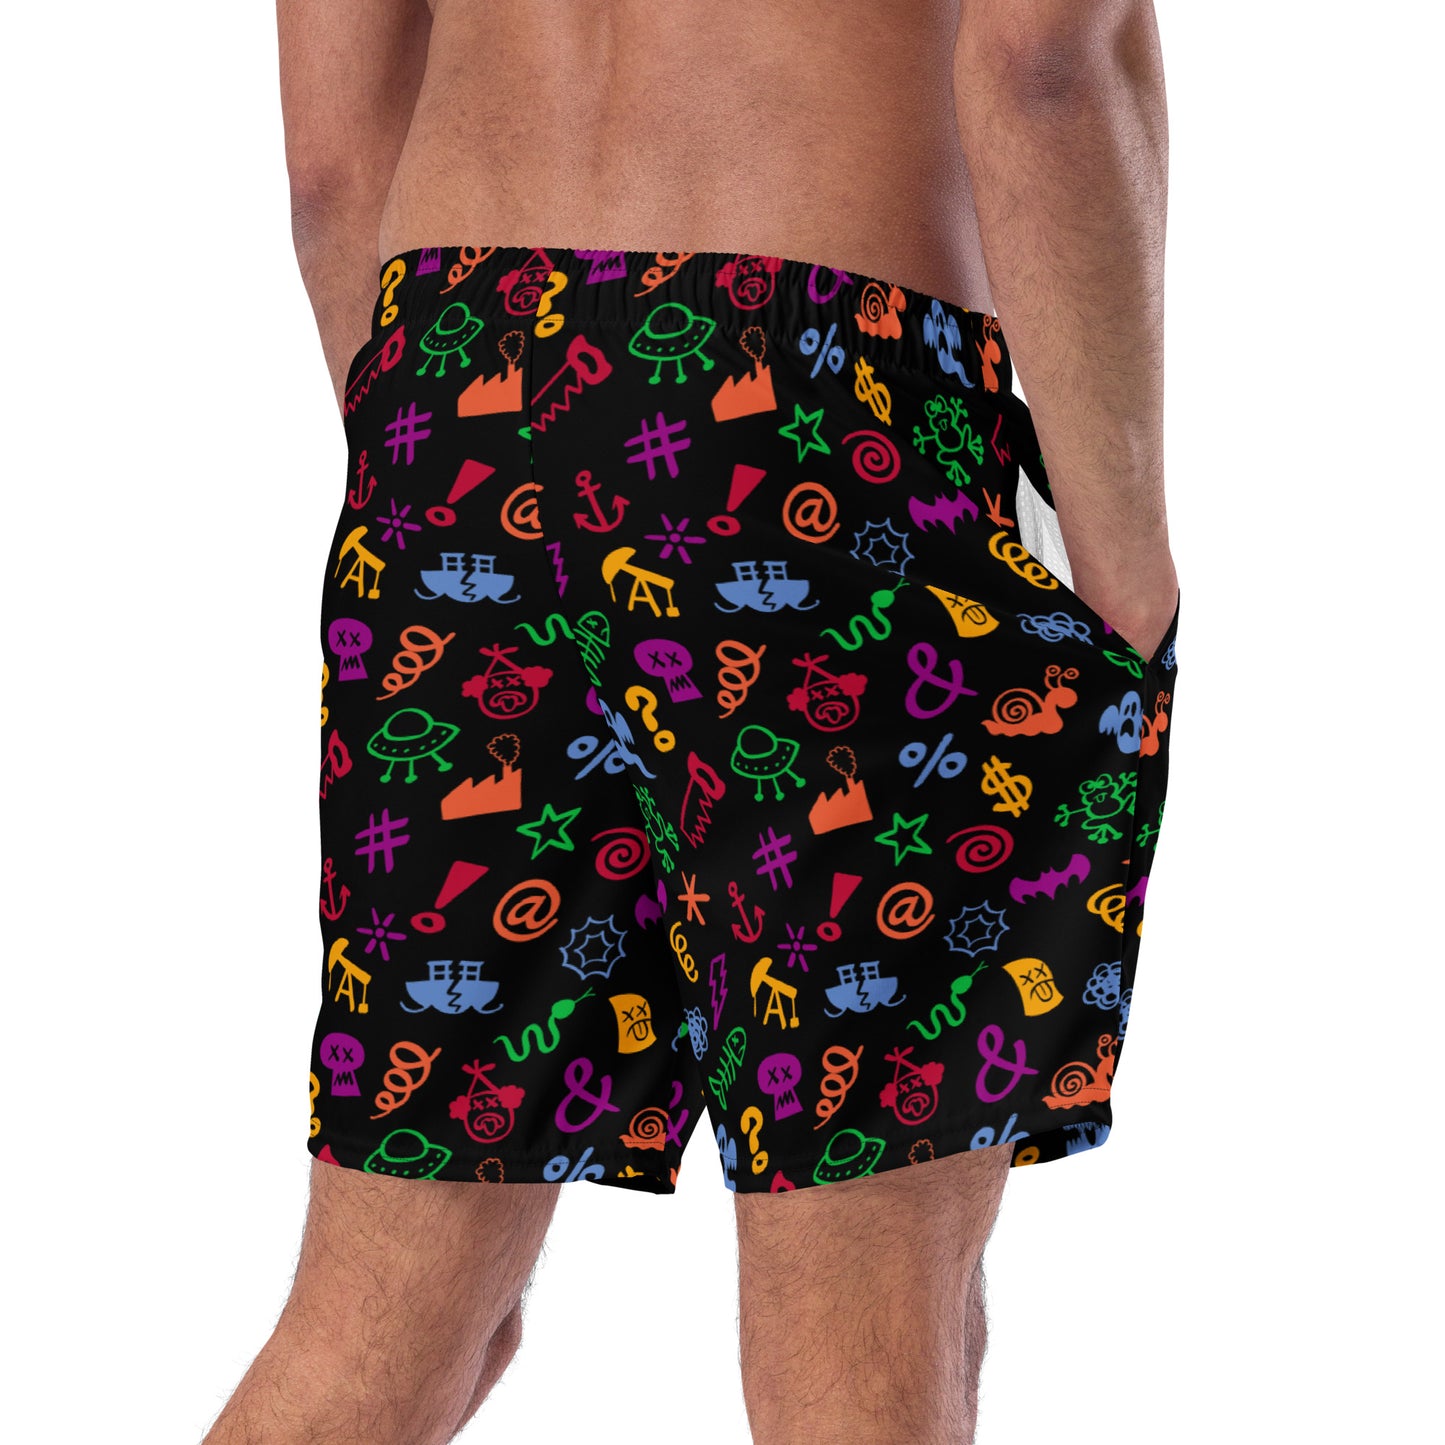 Wear these bad words Men's swim trunks, swear with confidence, keep your smile. Back view